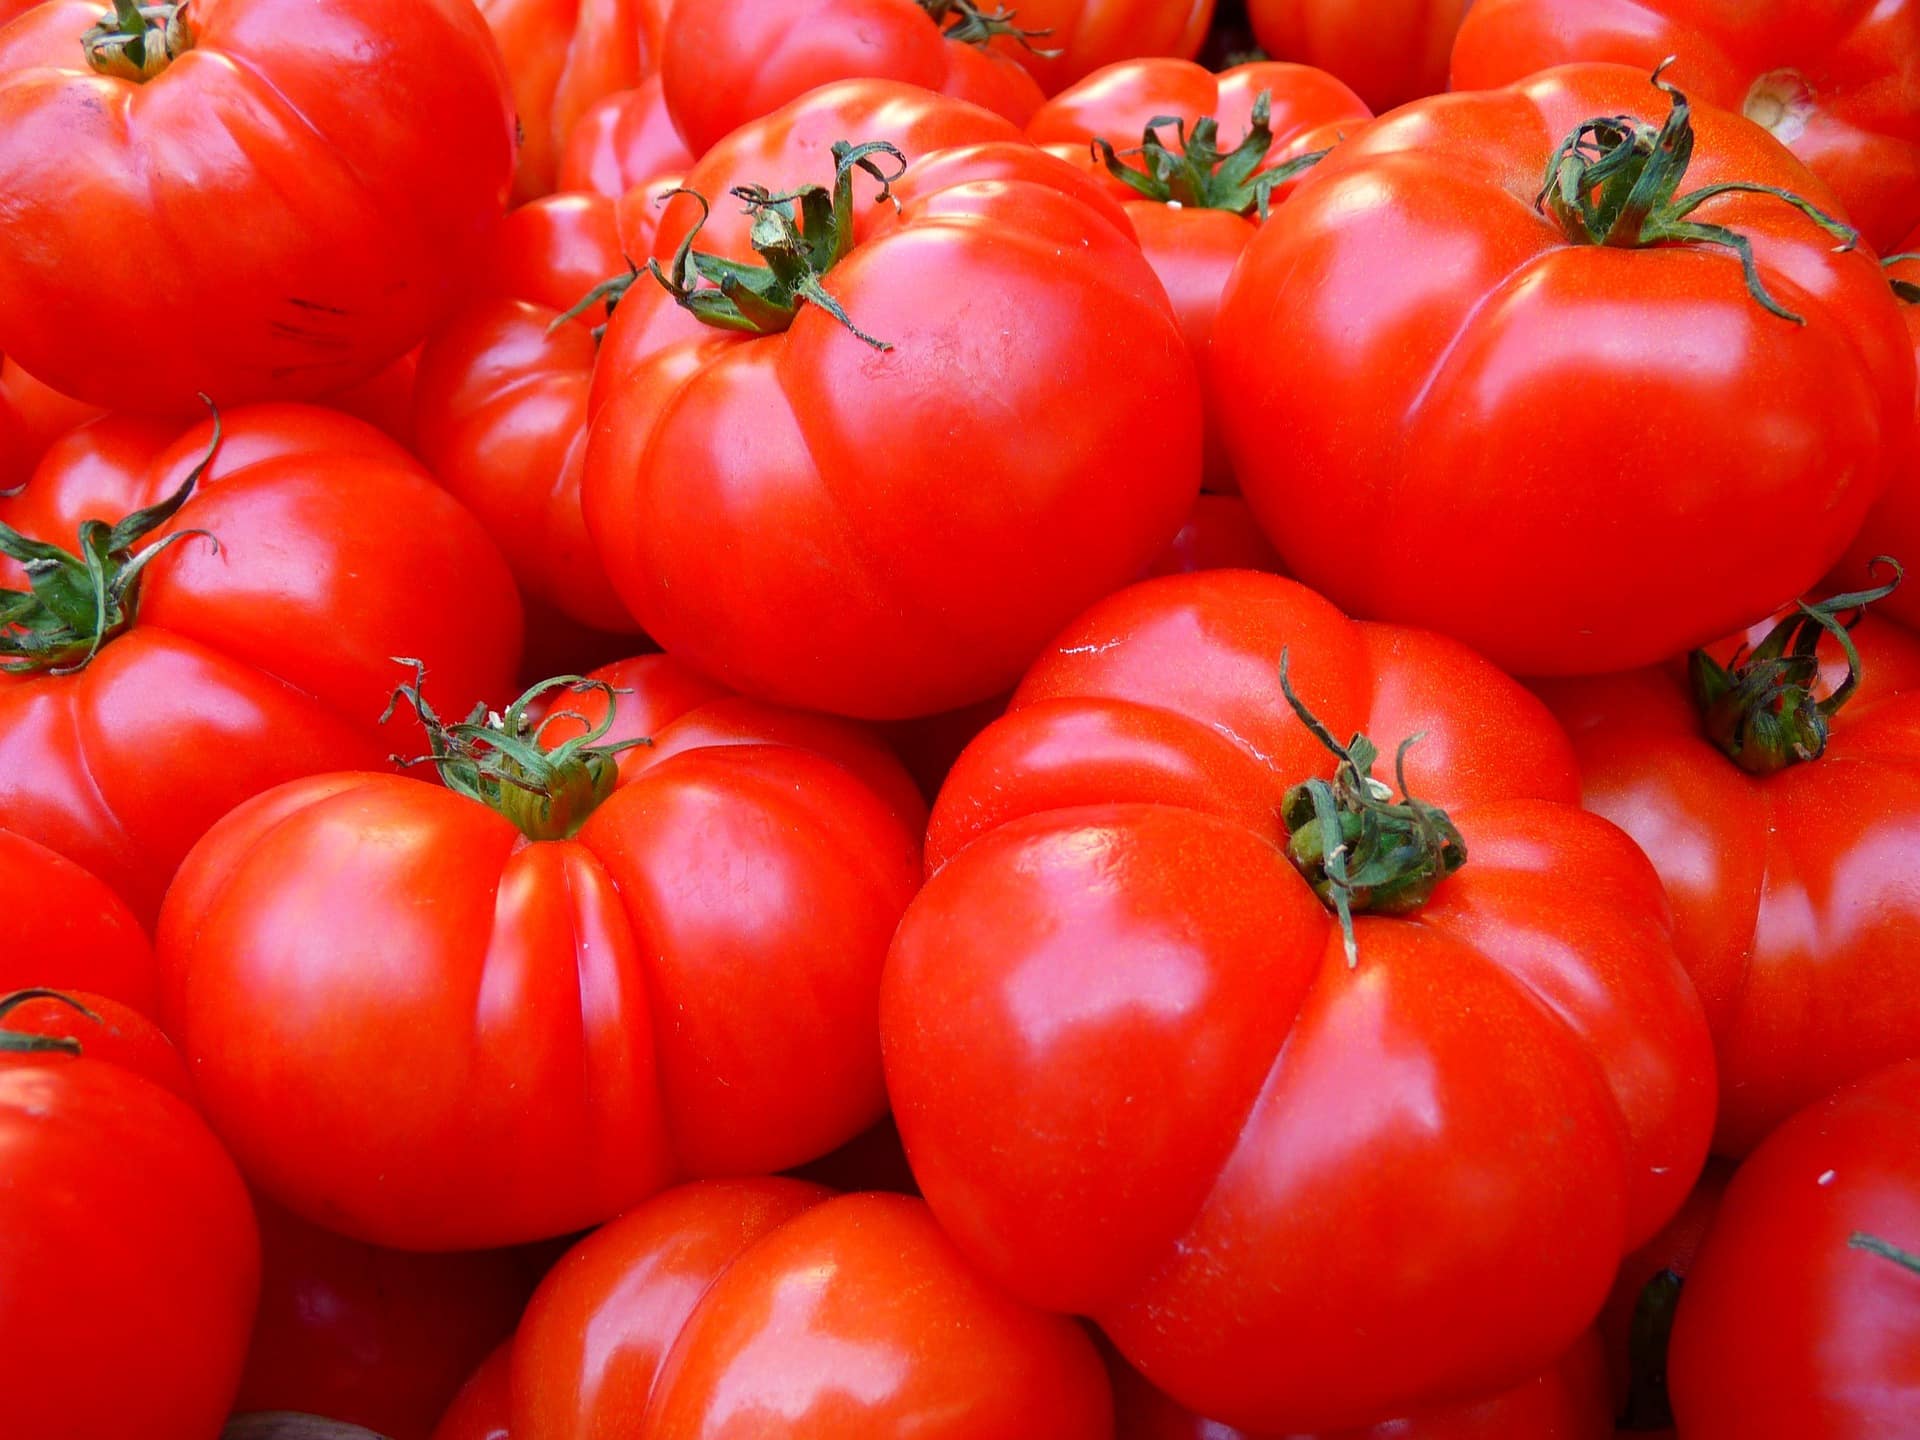 Tel Aviv University Researchers Harness CRISPR Technology for Water-Efficient Tomato Cultivation - Seed WorldVarieties could help maintain yield...